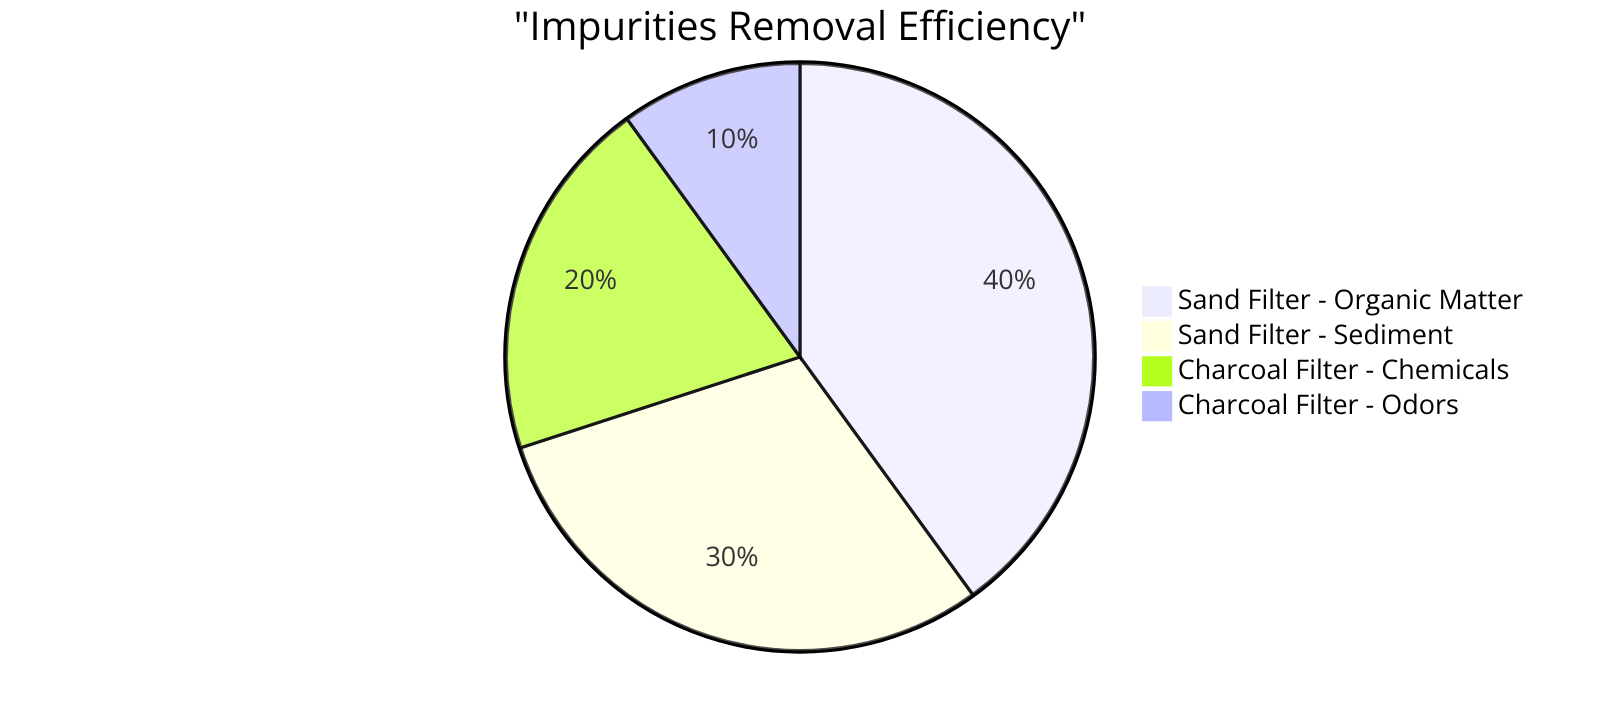  the percentage of common impurities removed by sand and charcoal filters, visually demonstrating their efficiency